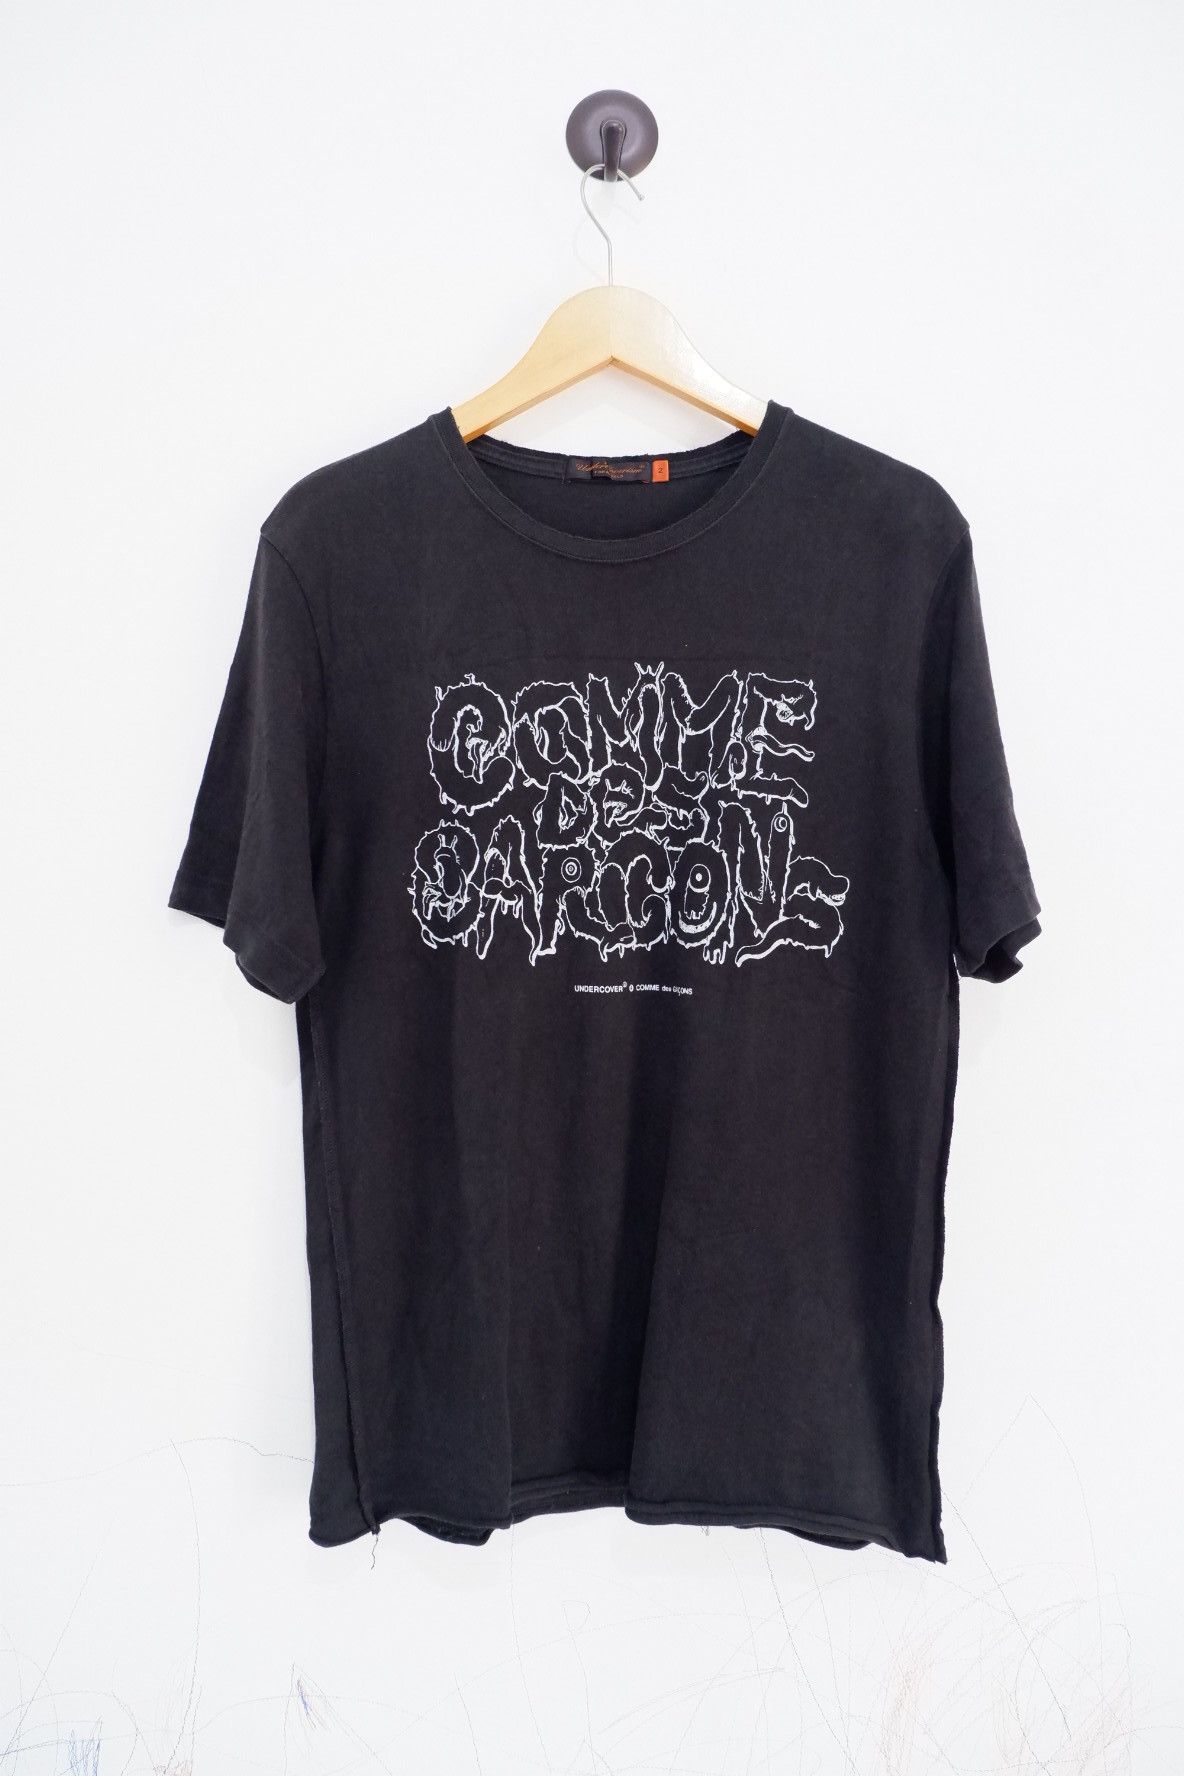 Undercover Undercover x Cdg Reconstructed Tees | Grailed